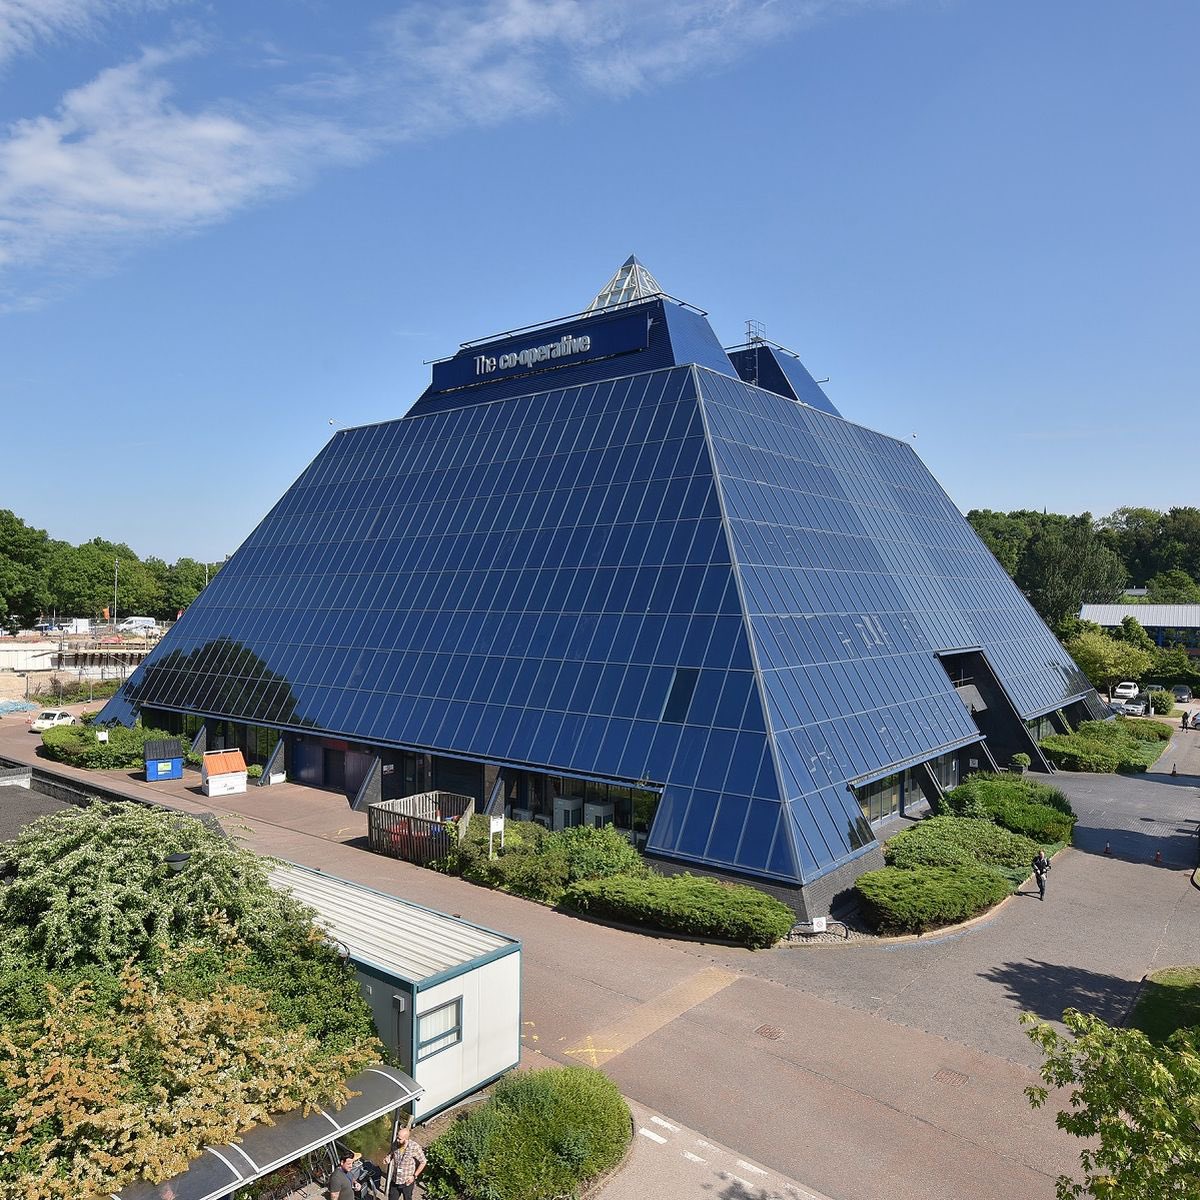 King Tut! To mark 100 years since Howard Carter discovered the tomb of the boy Pharaoh, we bring you that enduring symbol of Ancient Egyptian design - the pyramid. Here are 10 lesser-known examples of UK pyramids👇🏽 1. Stockport Pyramid (Maxwell Hutchinson, 1982) - office park